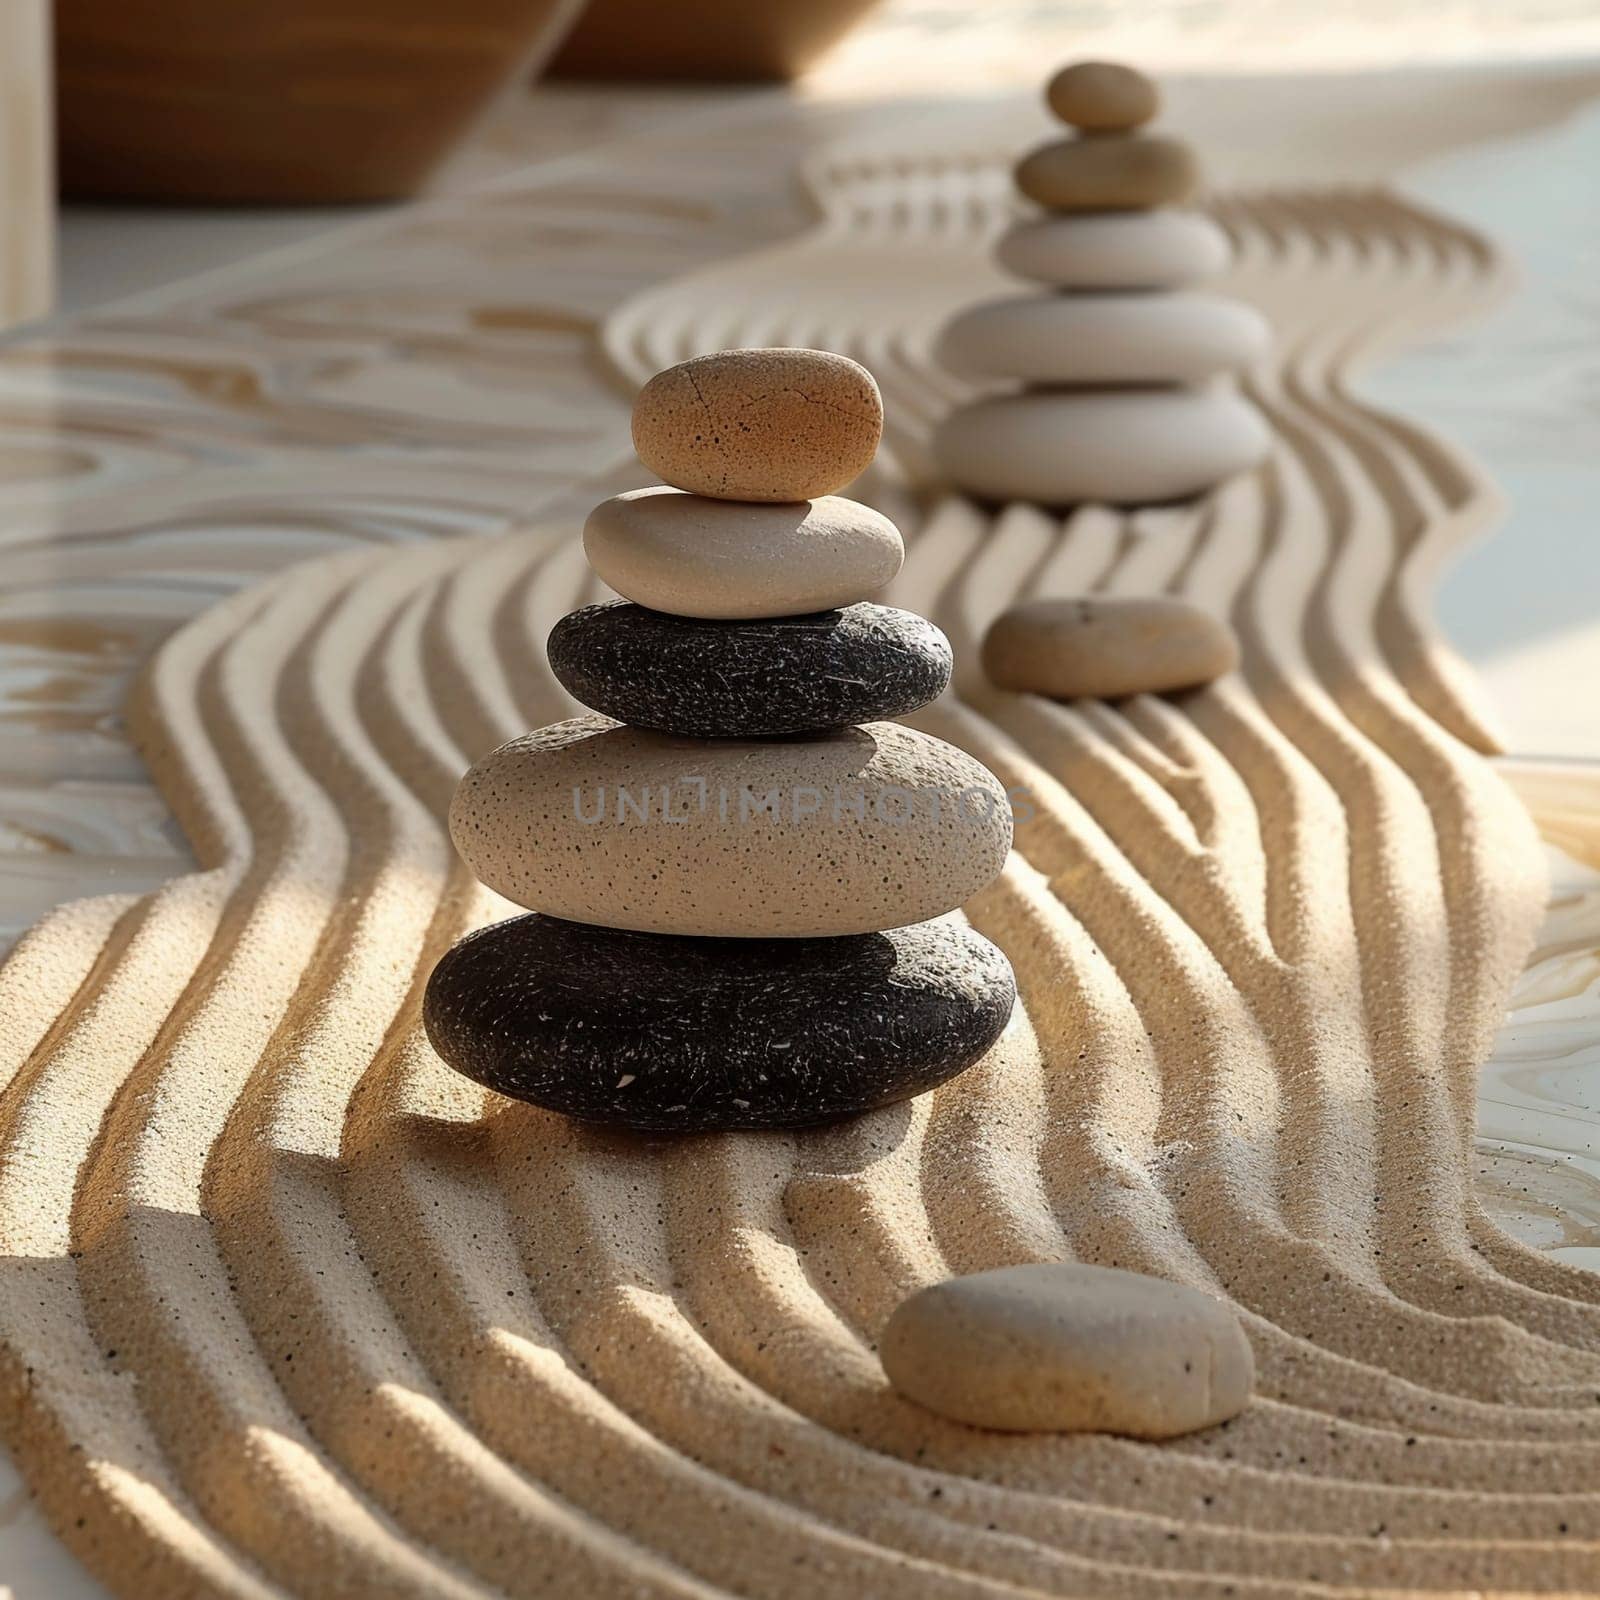 Tranquil Zen garden with raked sand and stones, suggesting peace and meditation.